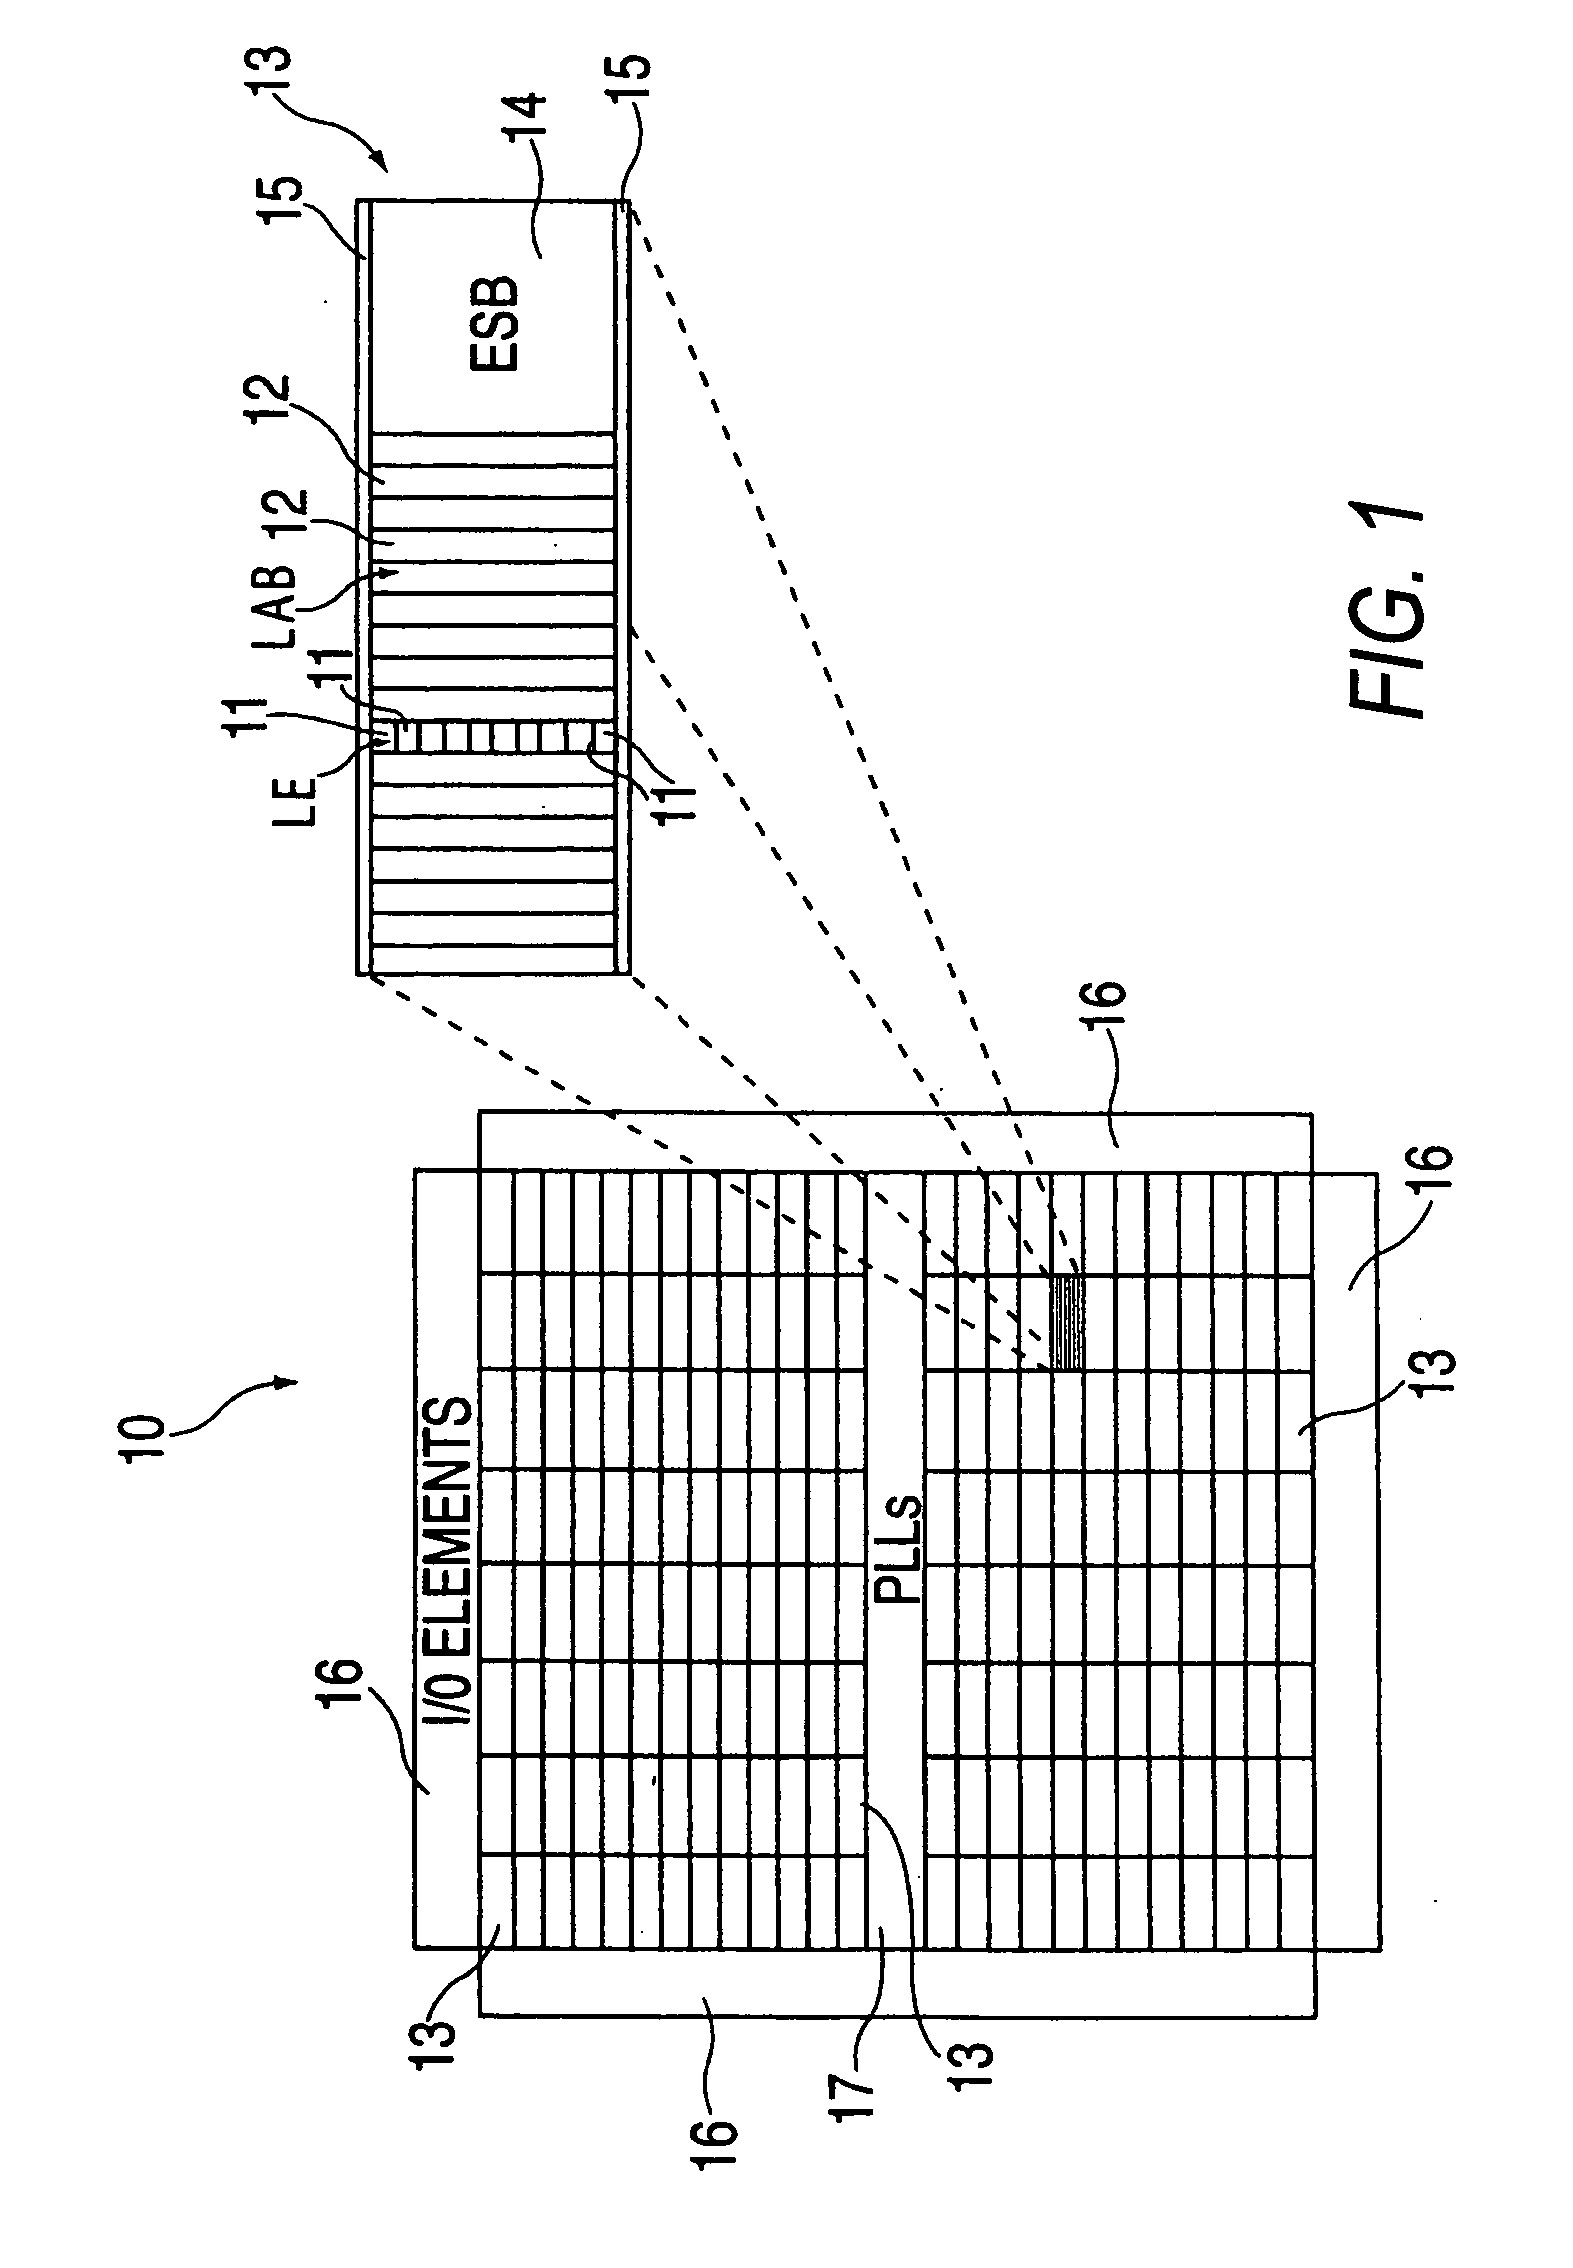 Switch methodology for mask-programmable logic devices